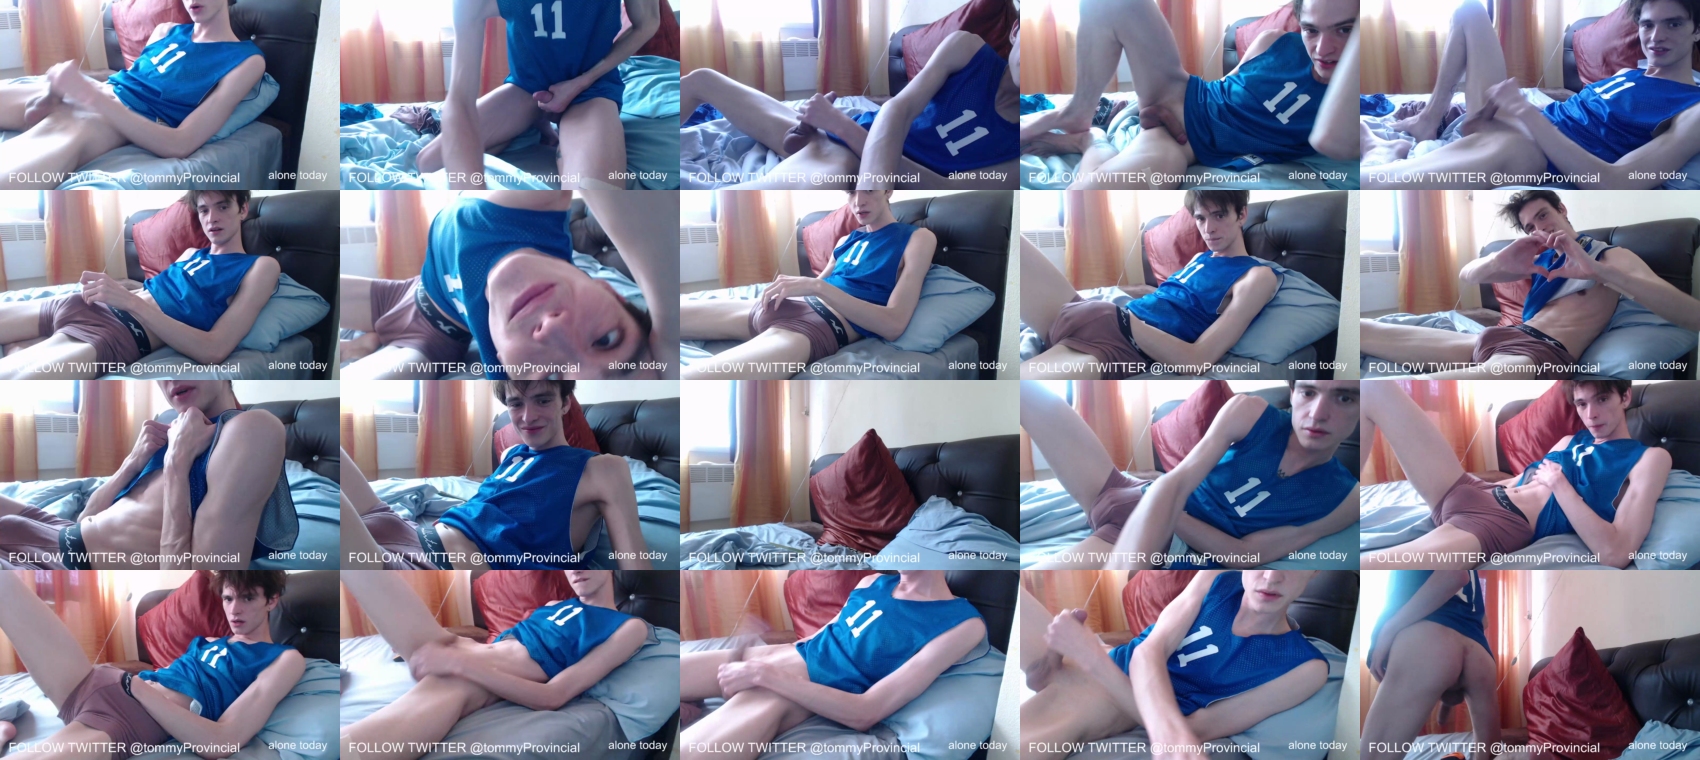 im_tommy jerking CAM SHOW @ Chaturbate 04-12-2022